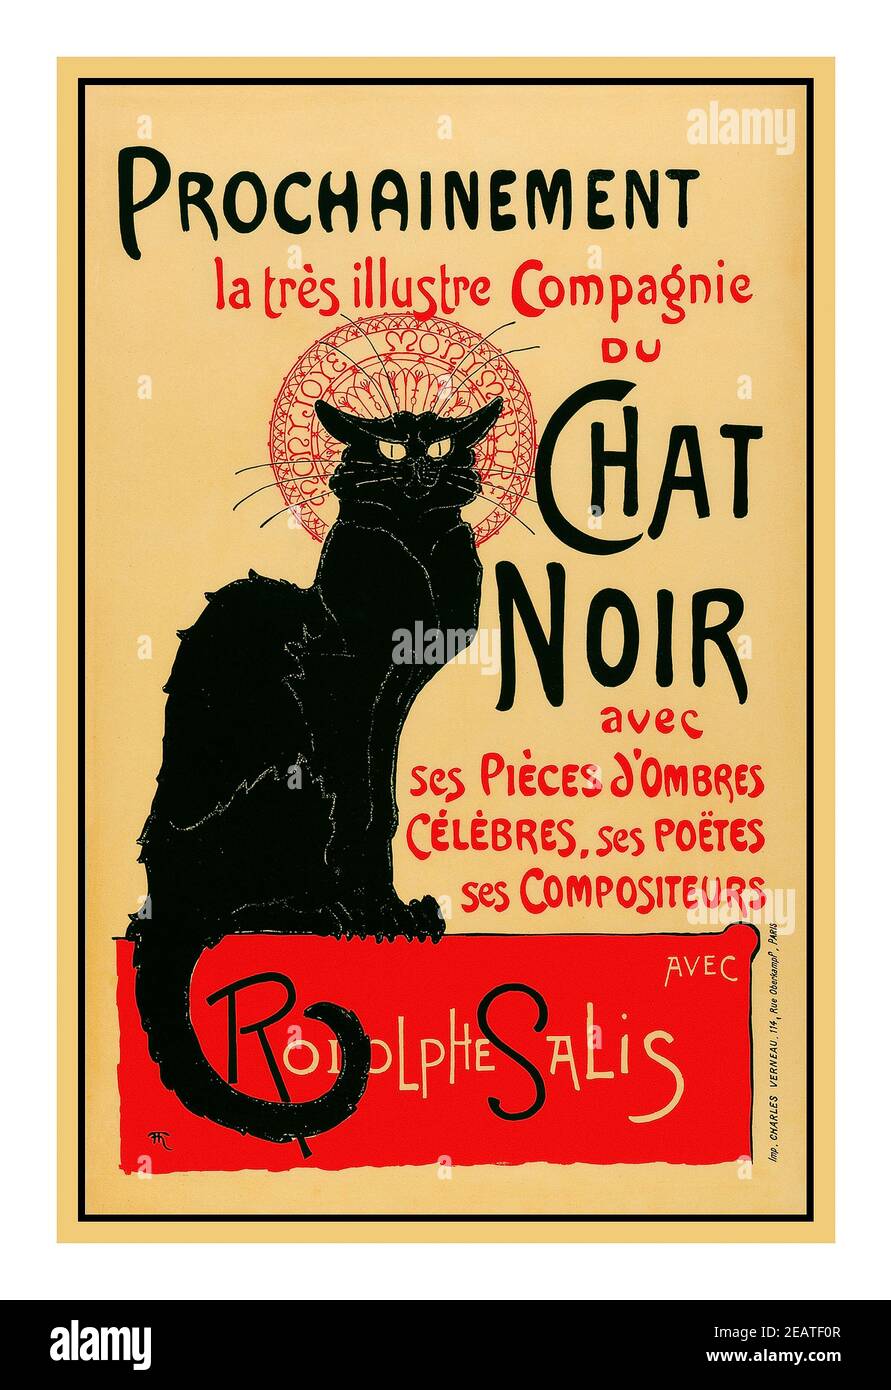 CHAT NOIR PARIS Montmartre Poster 1890’s  by Alexandre Steinlen, Prochainement la très illustre Compagnie du Chat Noir (Poster for the Company of the Black Cat) 1896, avec ses pieces sombres celebres ,ses poëtes ses Compositeurs 1890’s Poster Advertising forthcoming Attractions by the illustrious company of The Black Cat France Art Poster: This iconic poster art by Theophile Alexandre Steinlein was an advertisement for Le Chat Noir (The Black Cat), a famous 19C cabaret & nightclub in Montmartre, Paris France the club was opened by artist  Rodolphe Salis Stock Photo